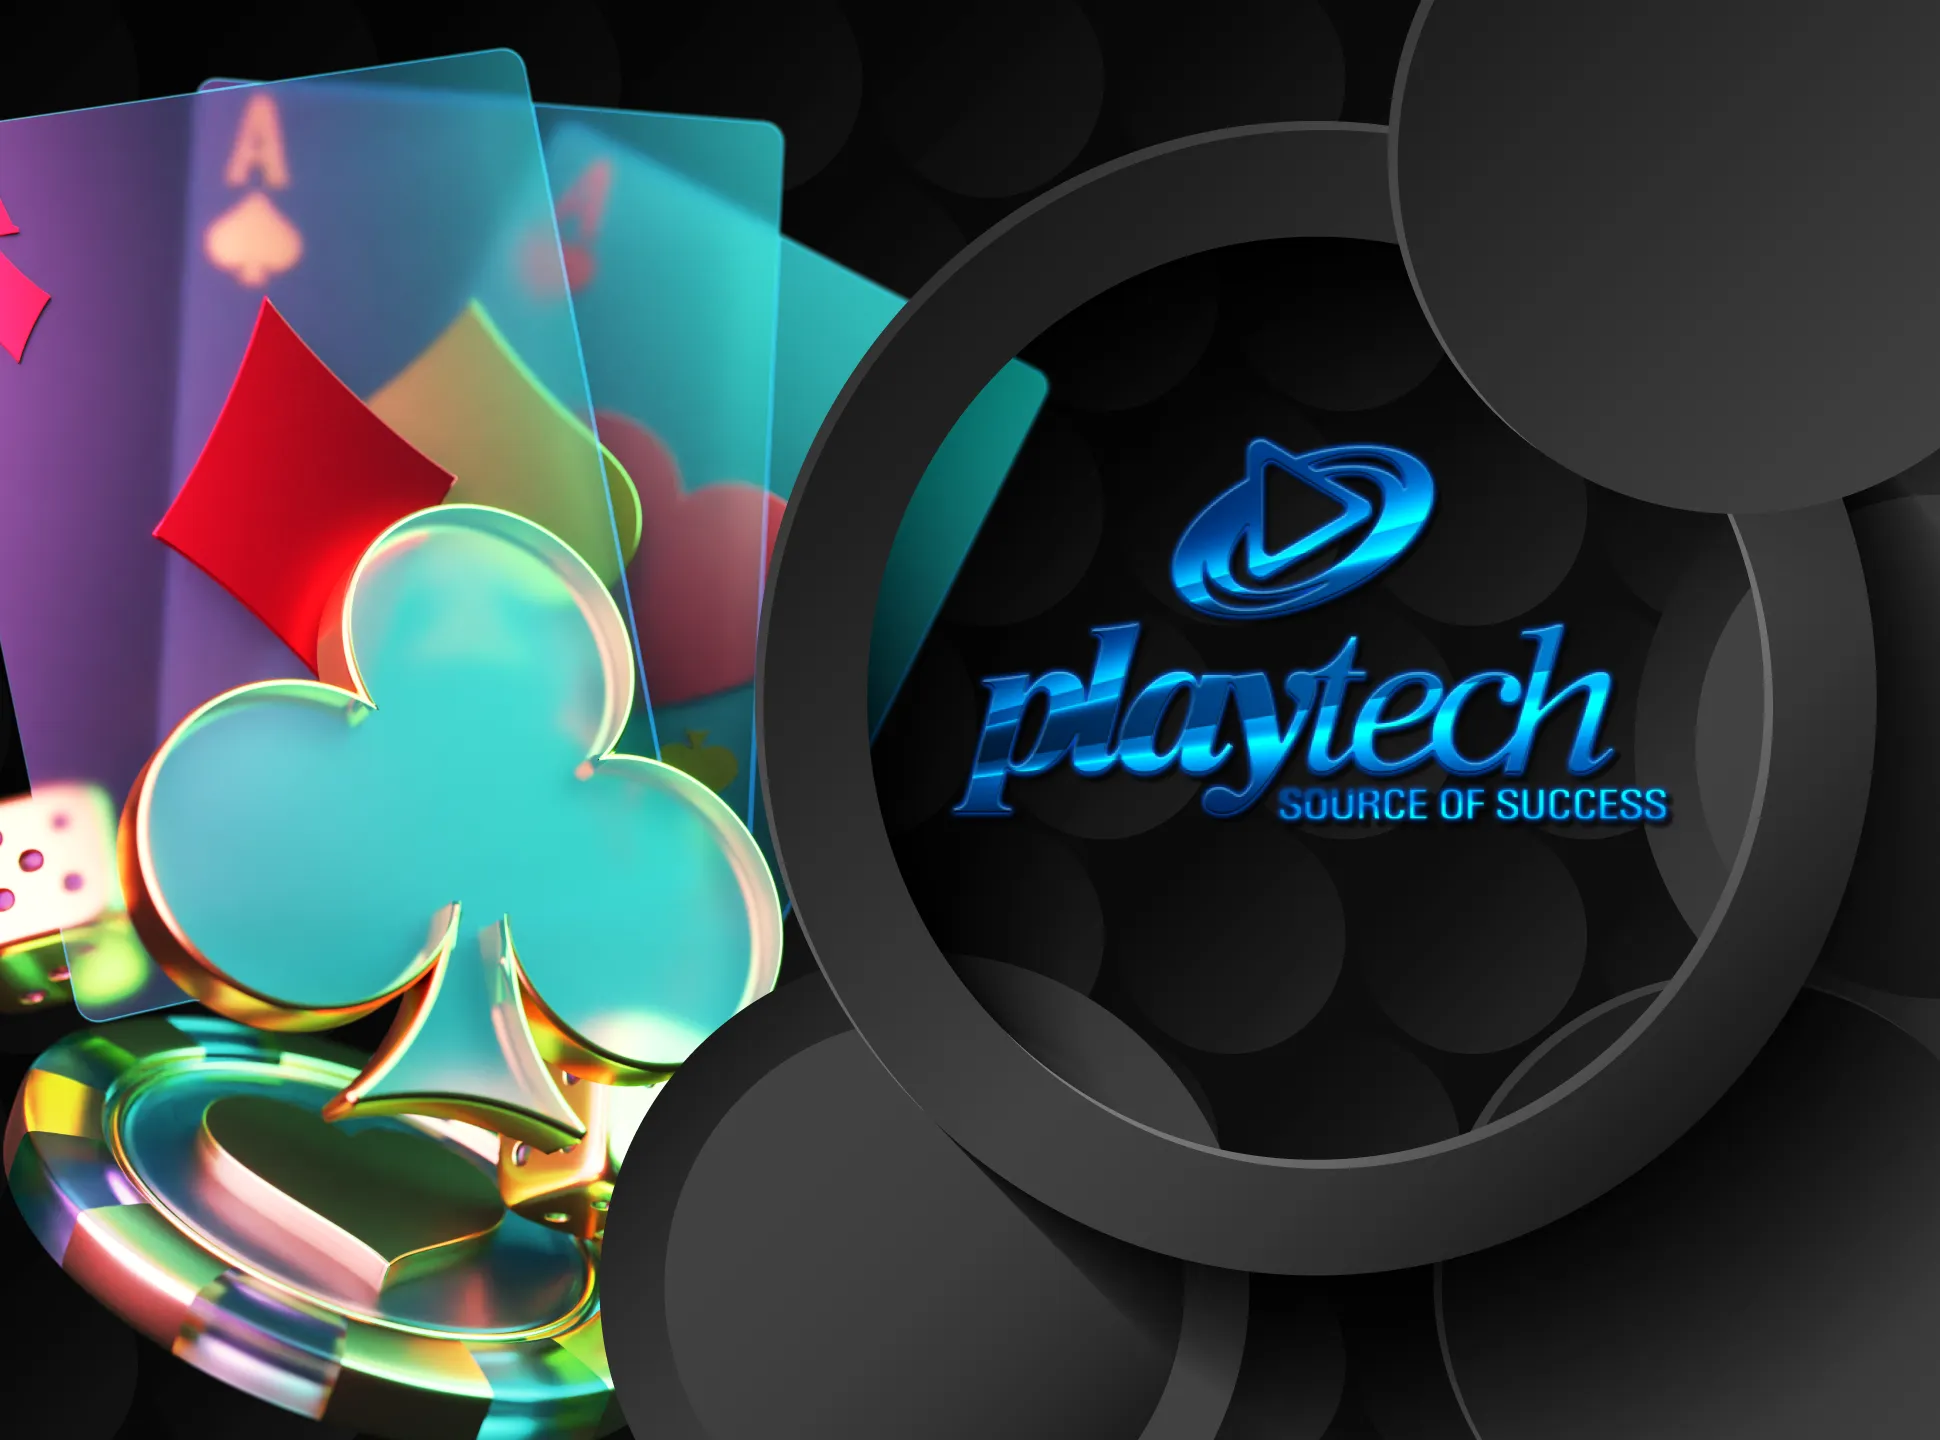 Playtech provides slots with various themes, such as Marvel or DC.